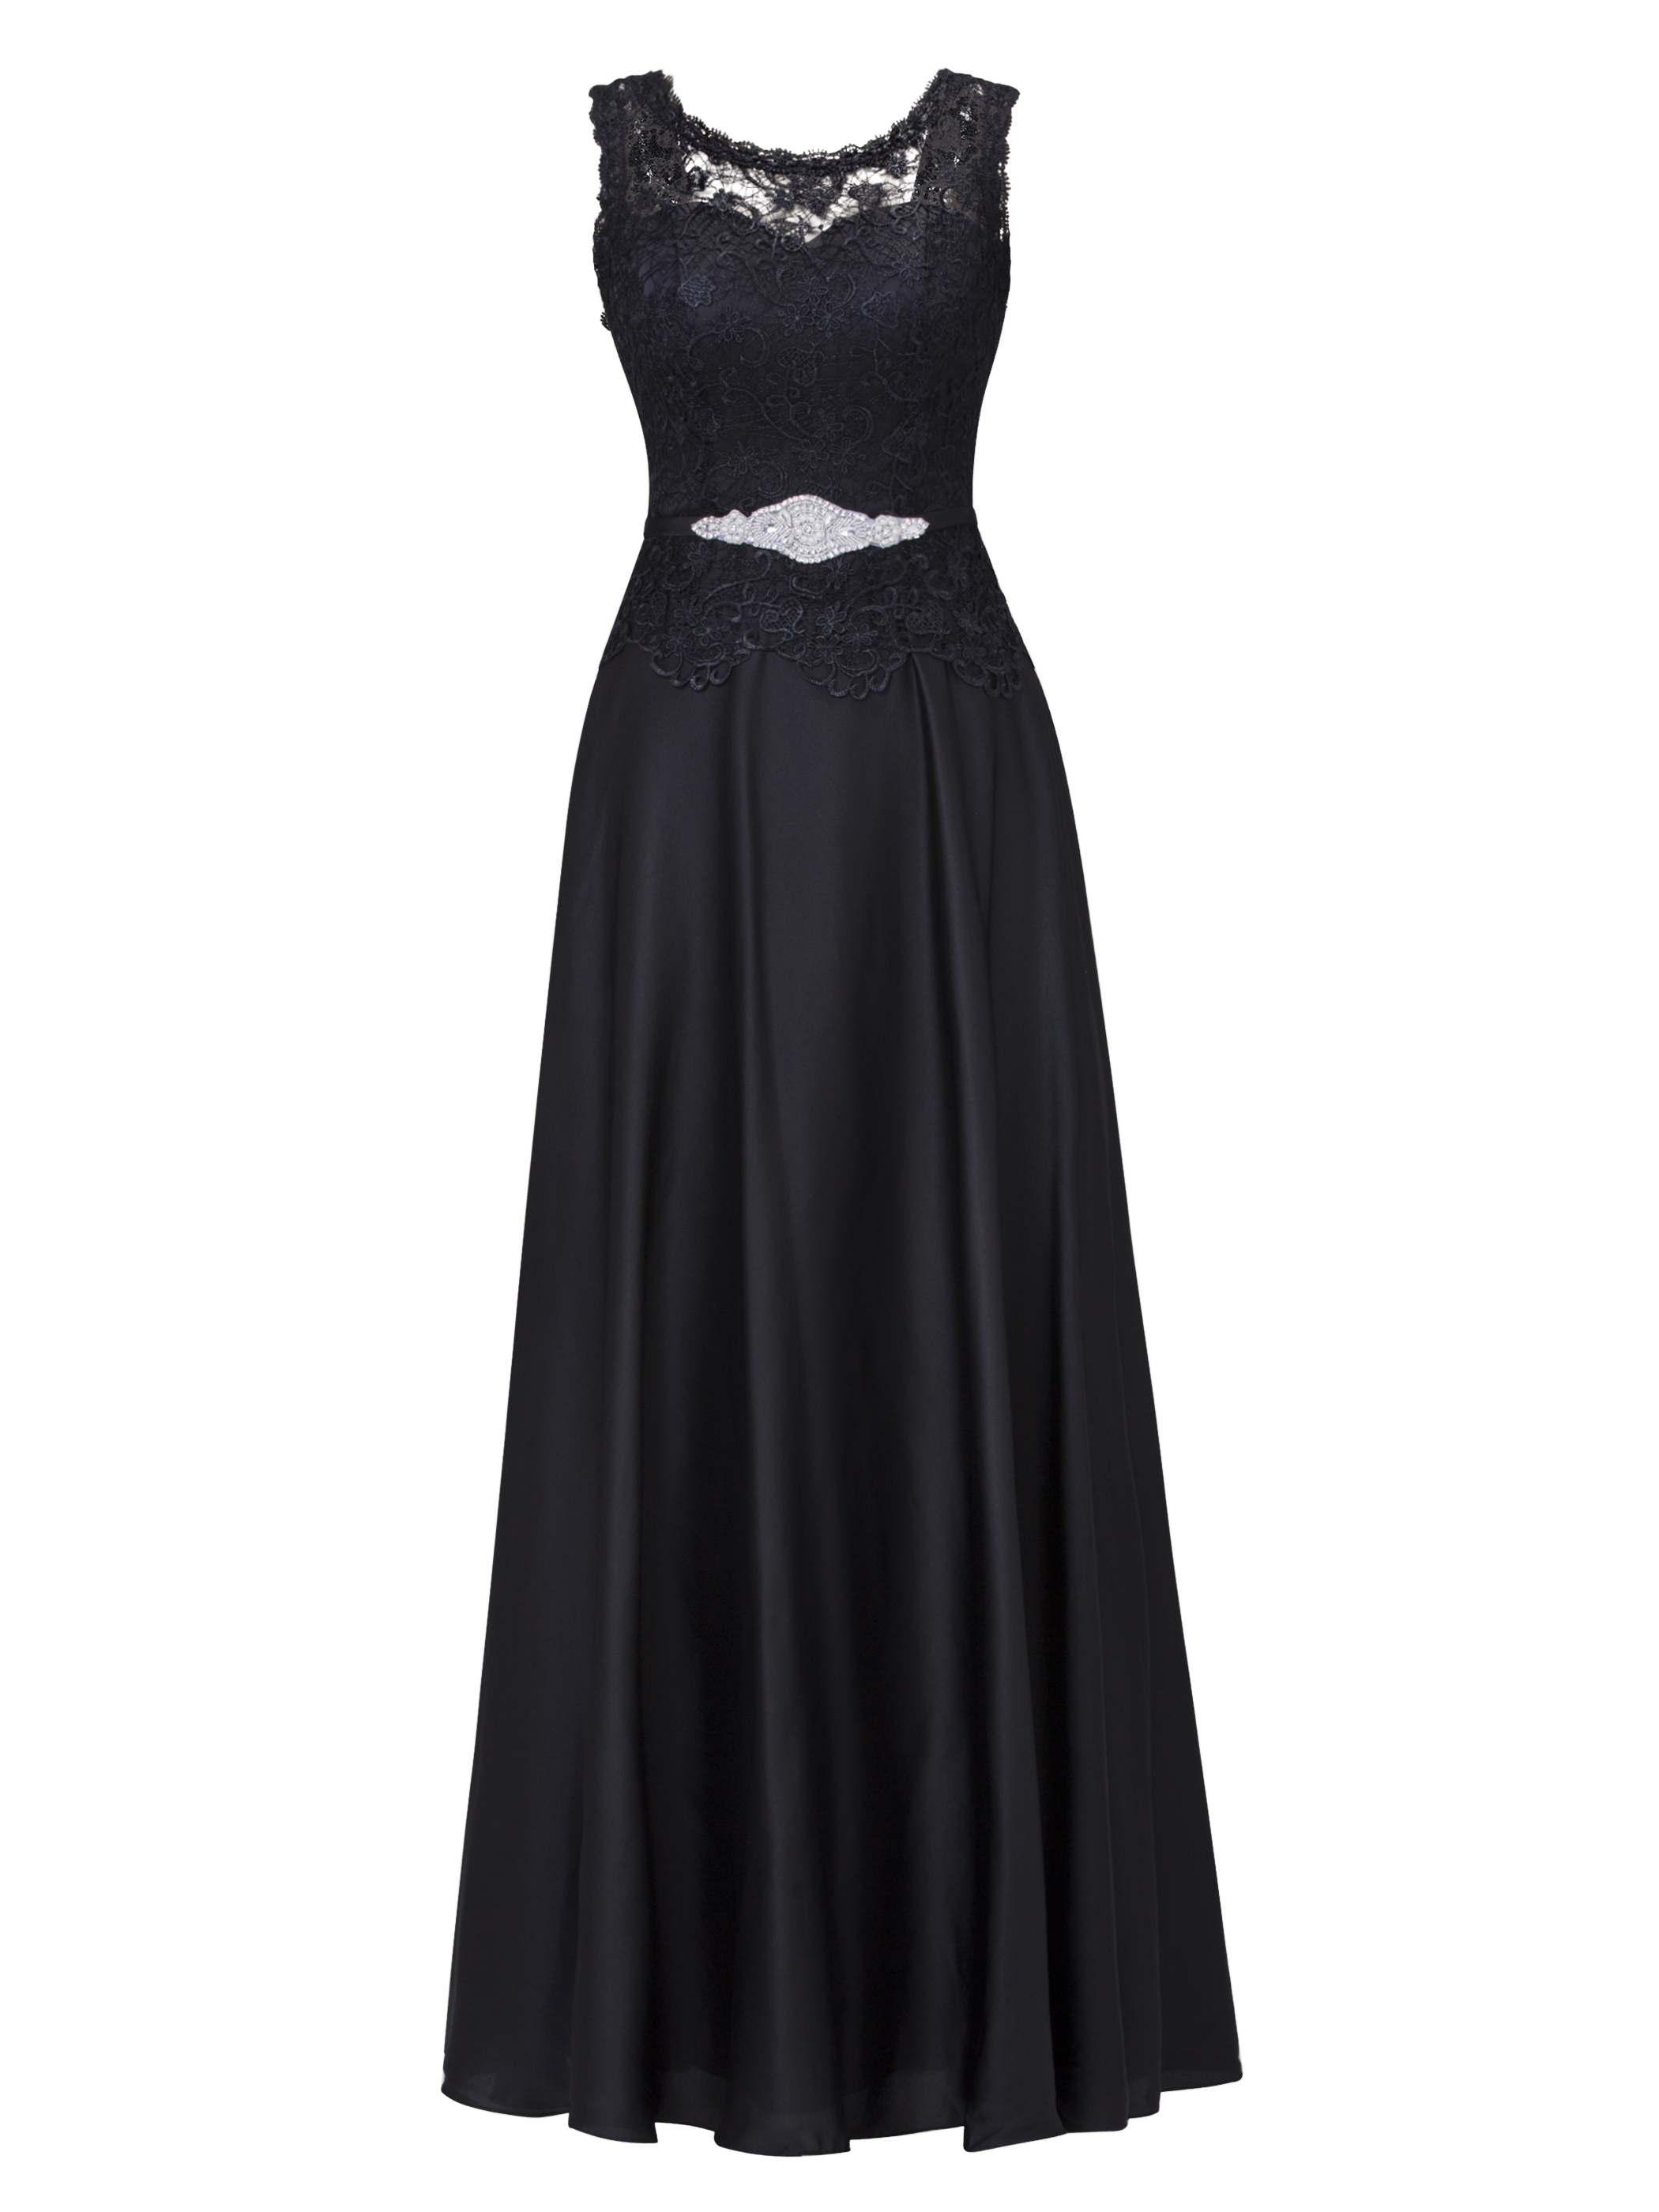 Ericdress Scoop Neck Lace-Up Ankle-Length Lace Evening Dress